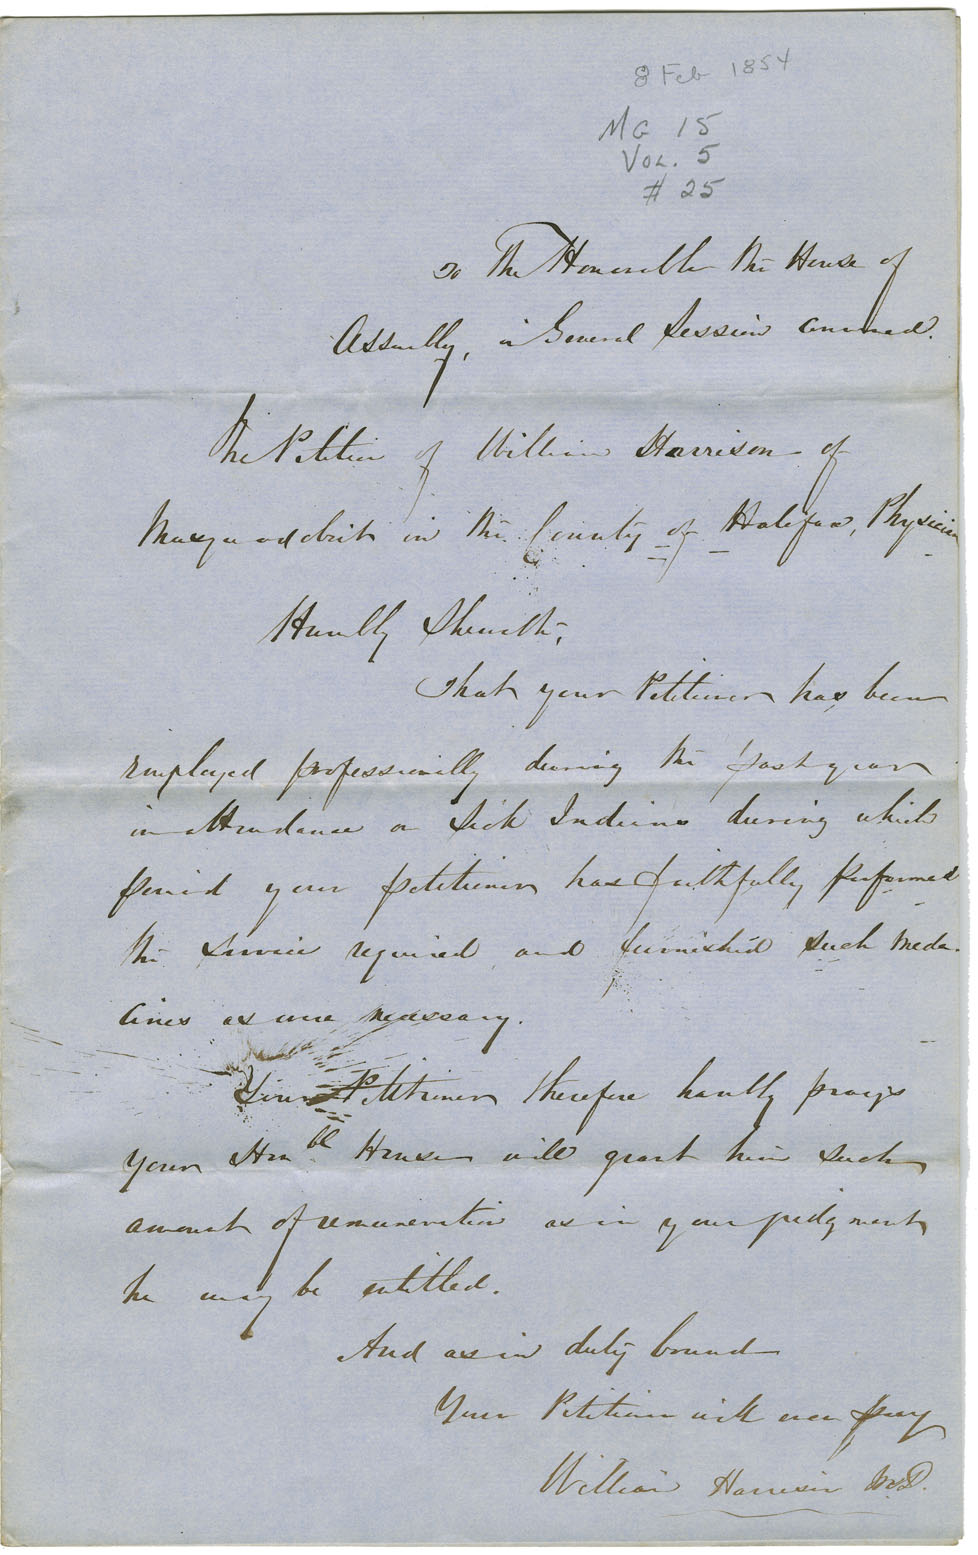 Petition of Dr. Harrison of Musquodoboit for payment for services to Mi'kmaq, and a letter from Overseers of the Poor confirming their sanction of his activities.